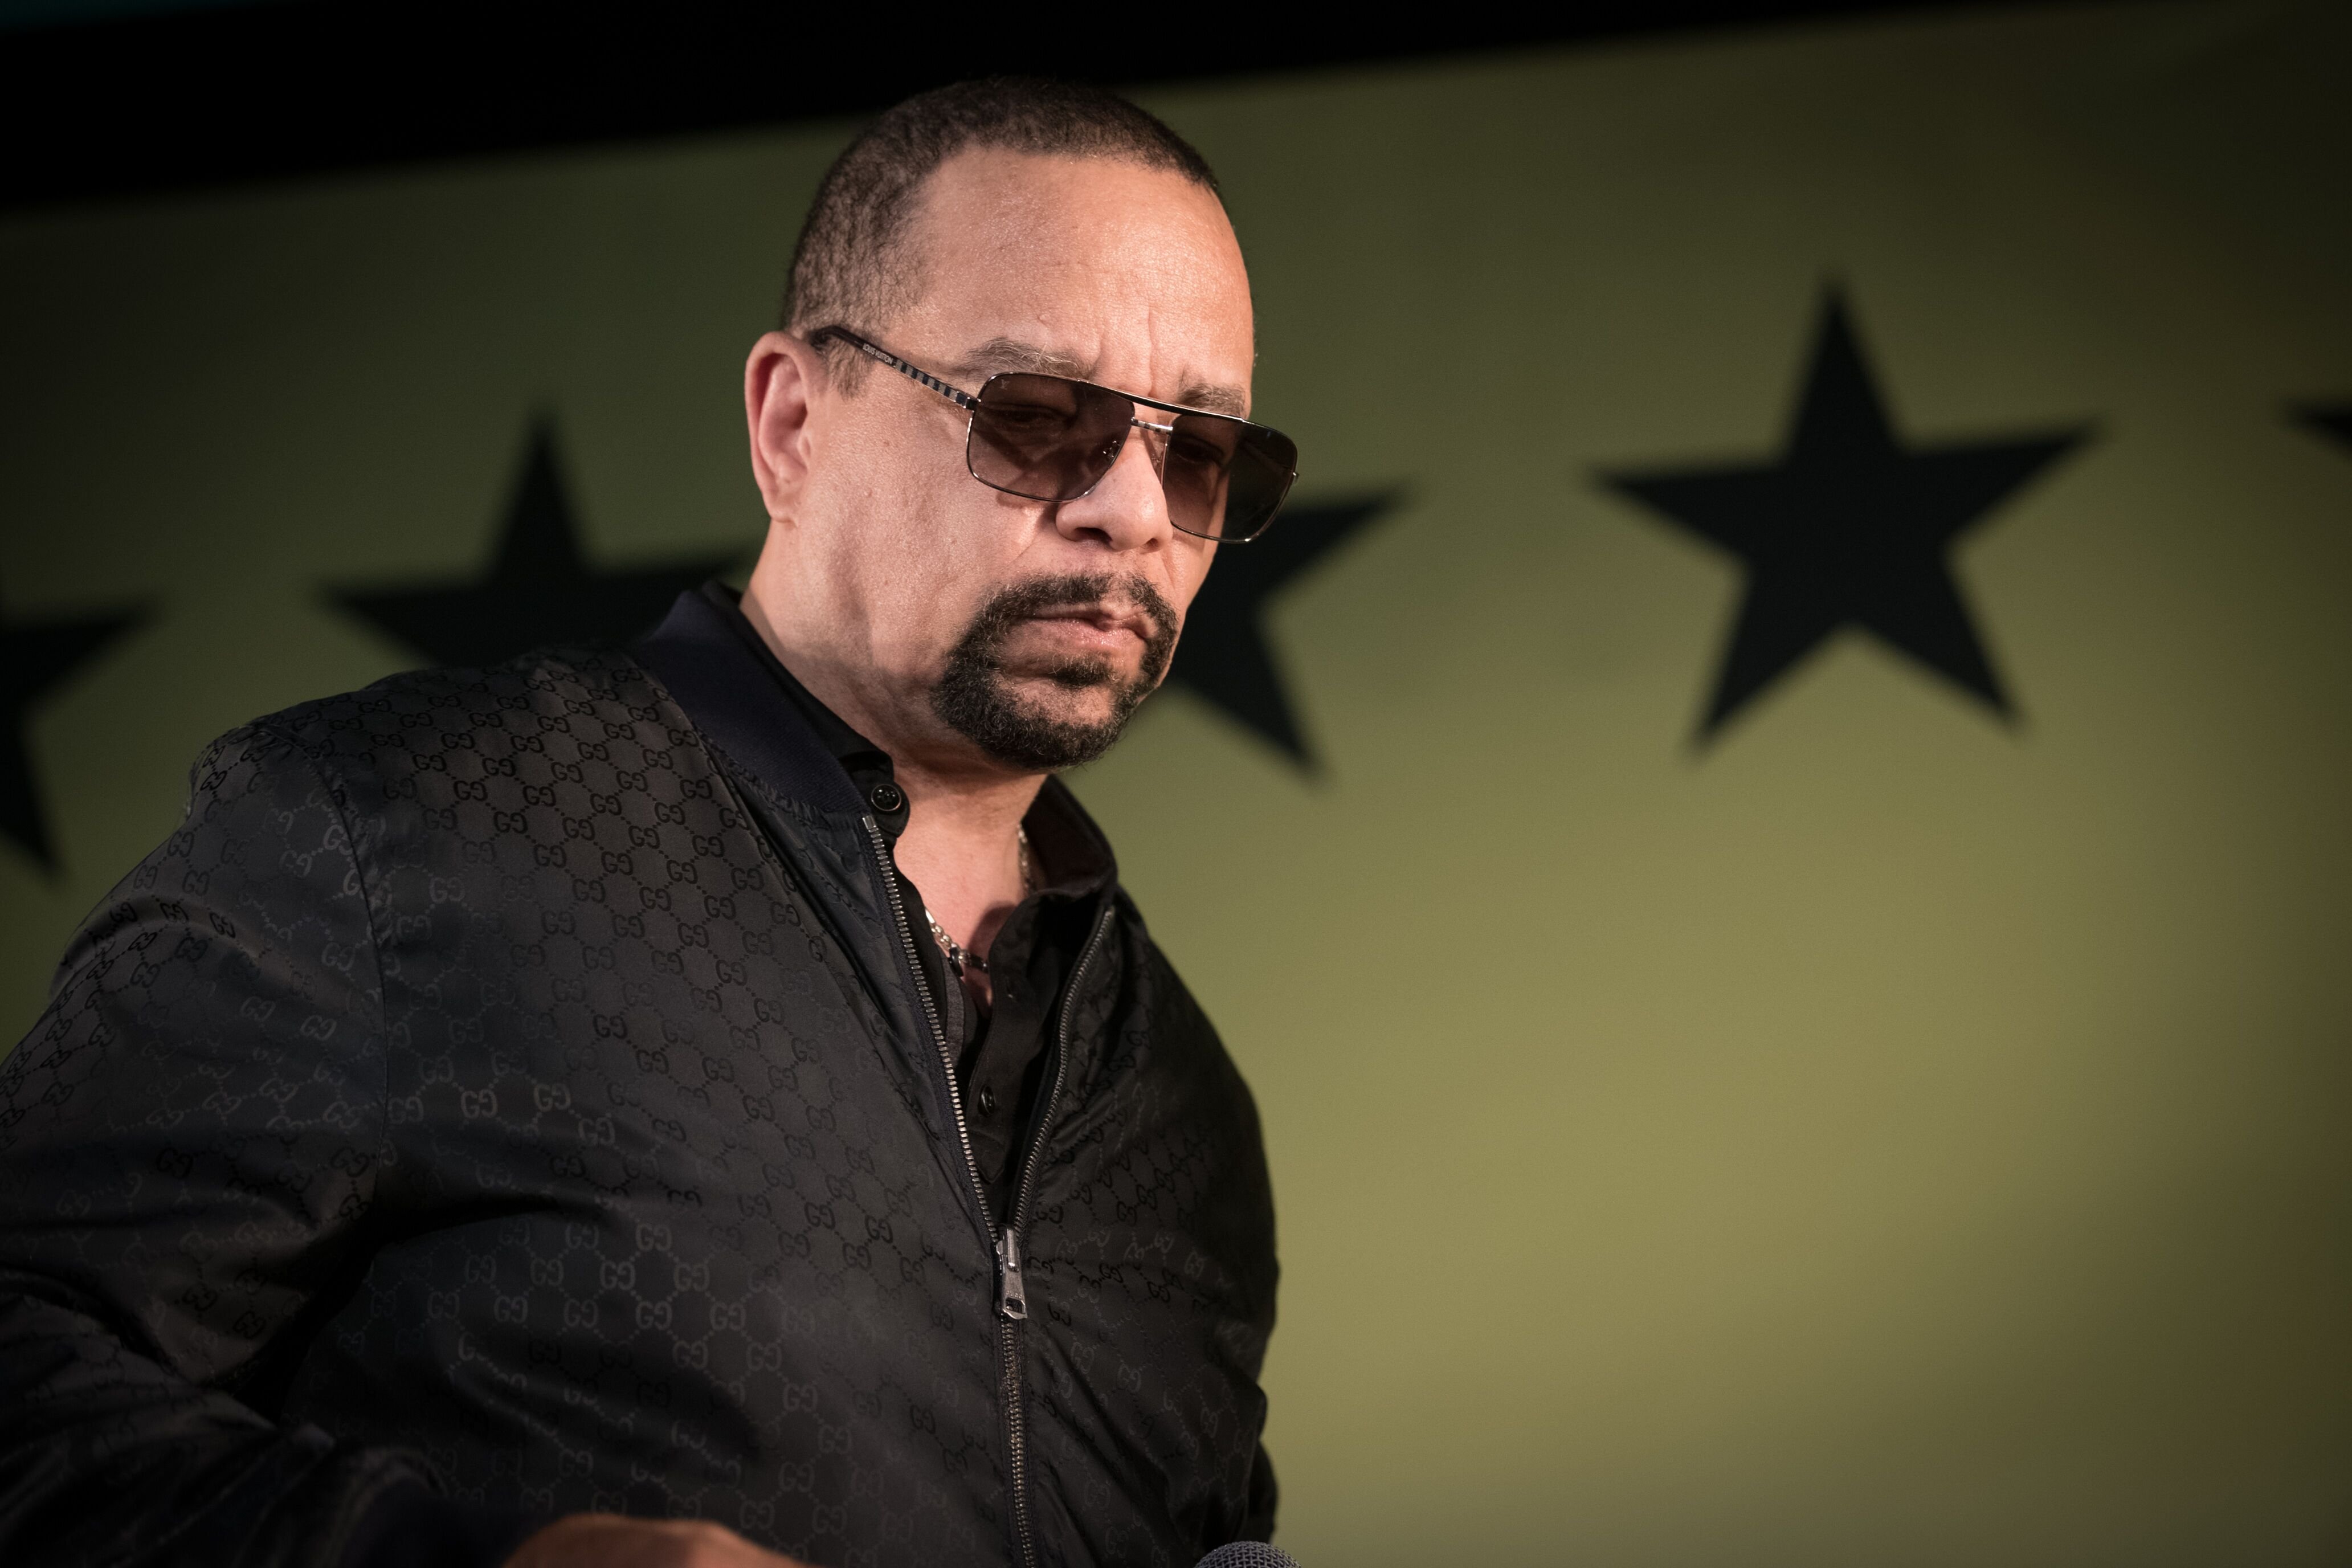 Ice-T performs at the Uncle Jamm's Army Reunion. | Source: Getty Images